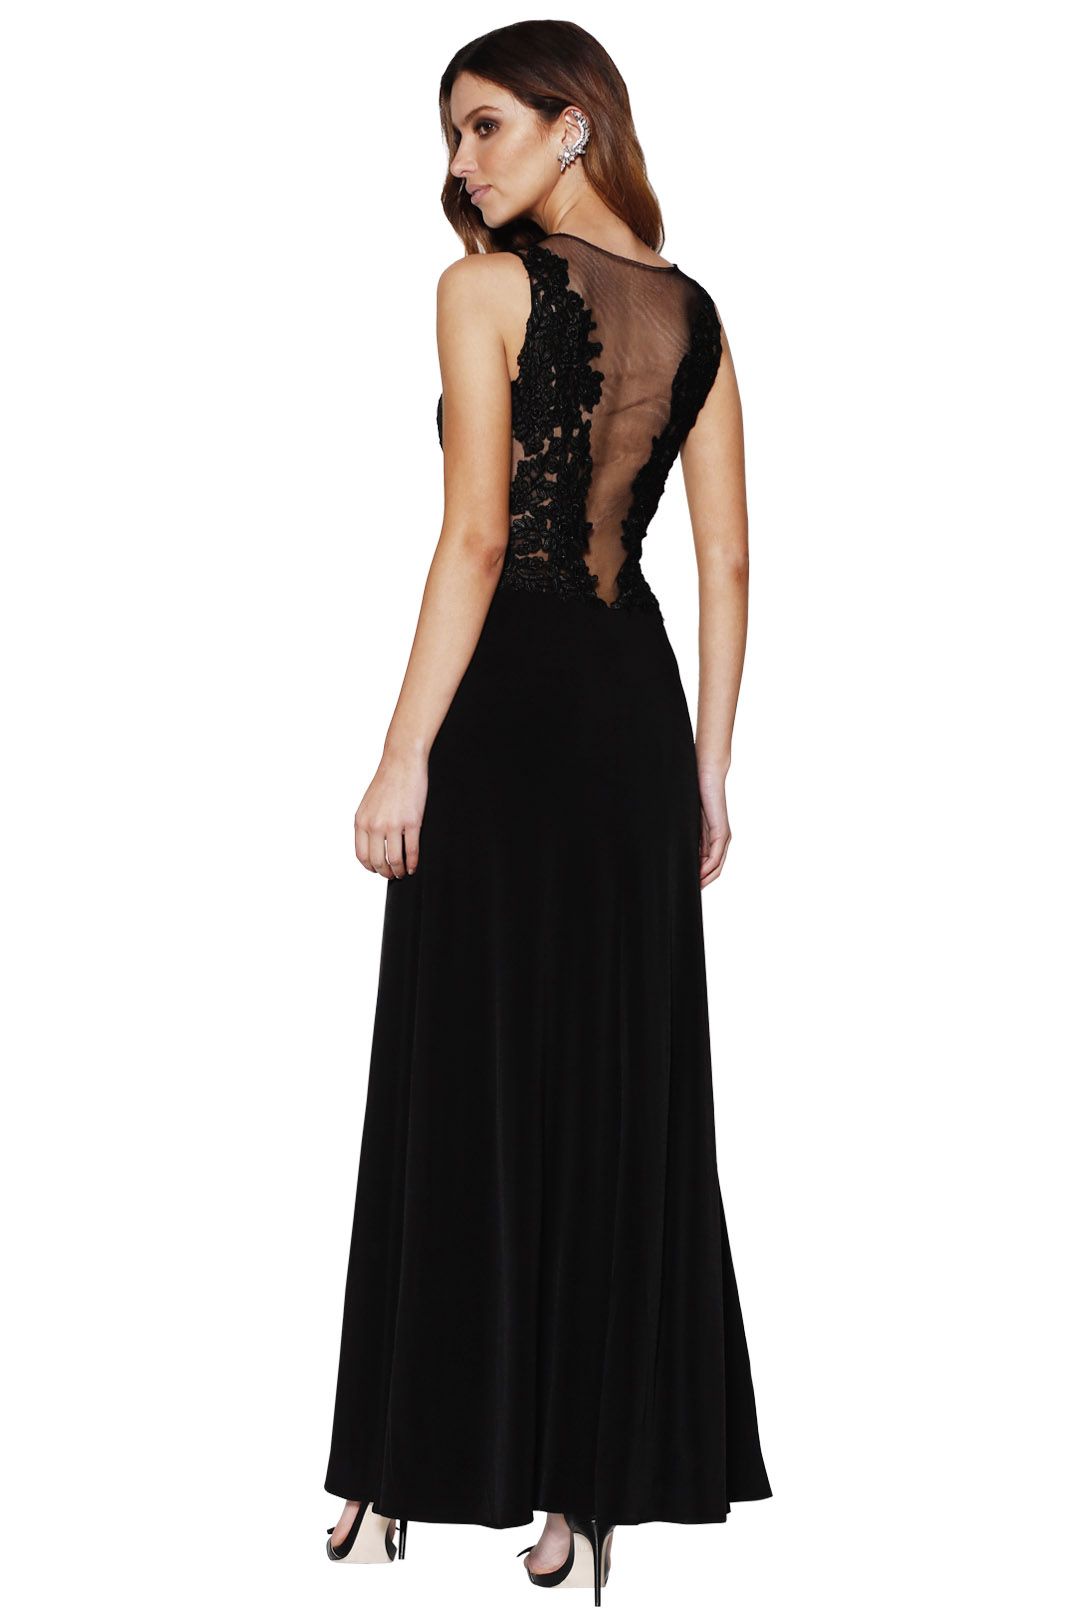 Grace and Hart - Starlet Gown Black - Back